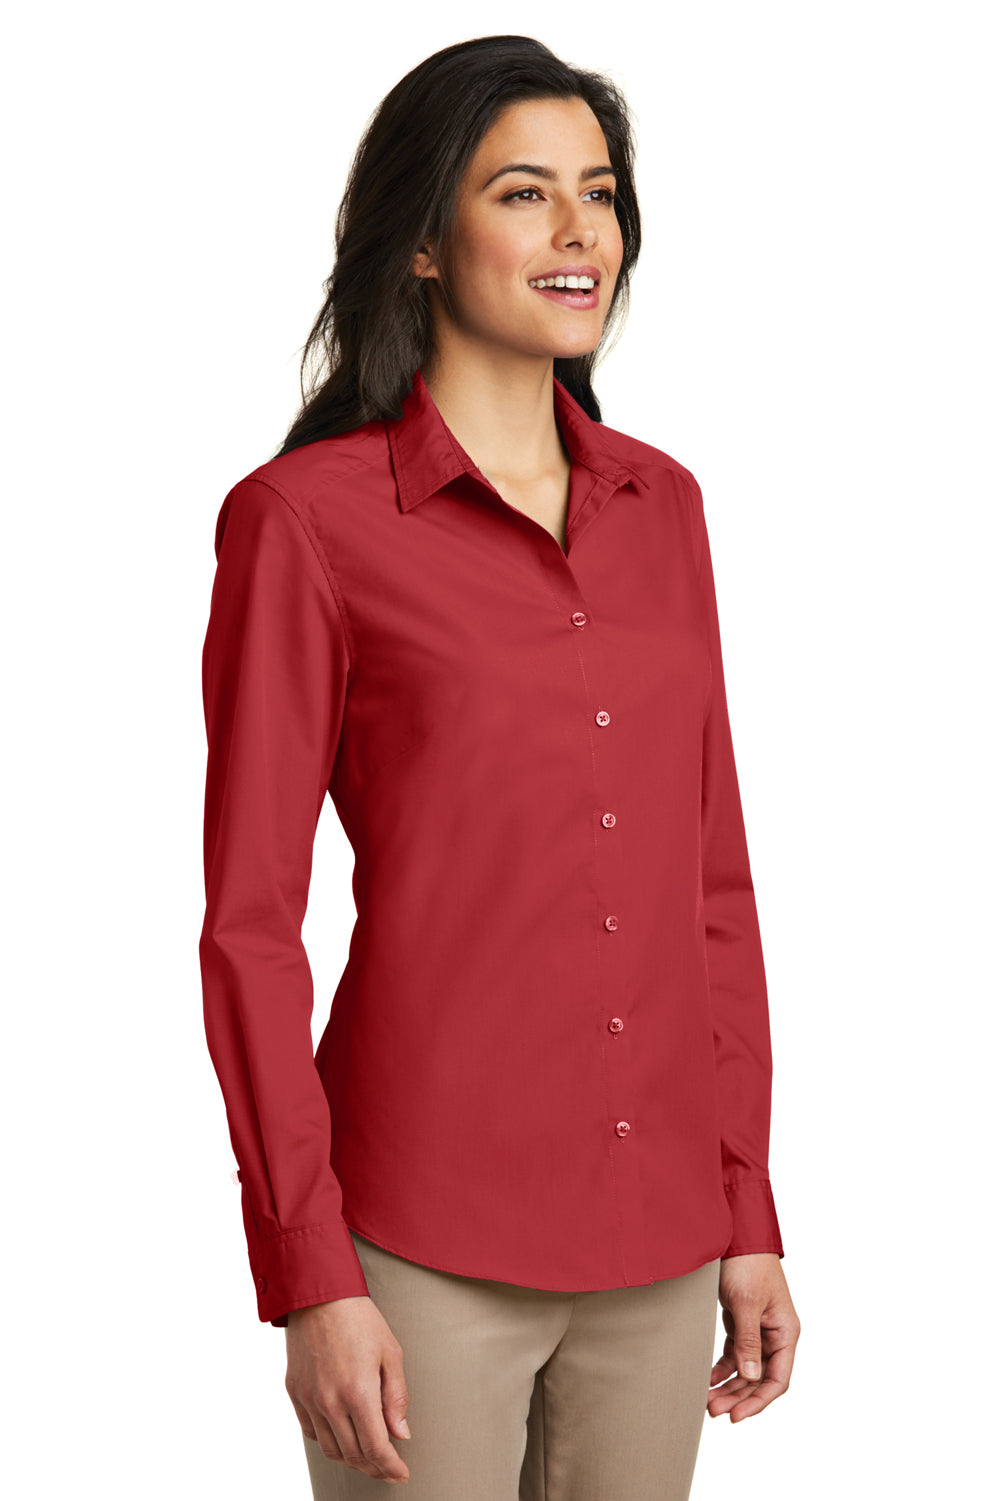 Port Authority LW100 Womens Carefree Stain Resistant Long Sleeve Button Down Shirt Rich Red 3Q